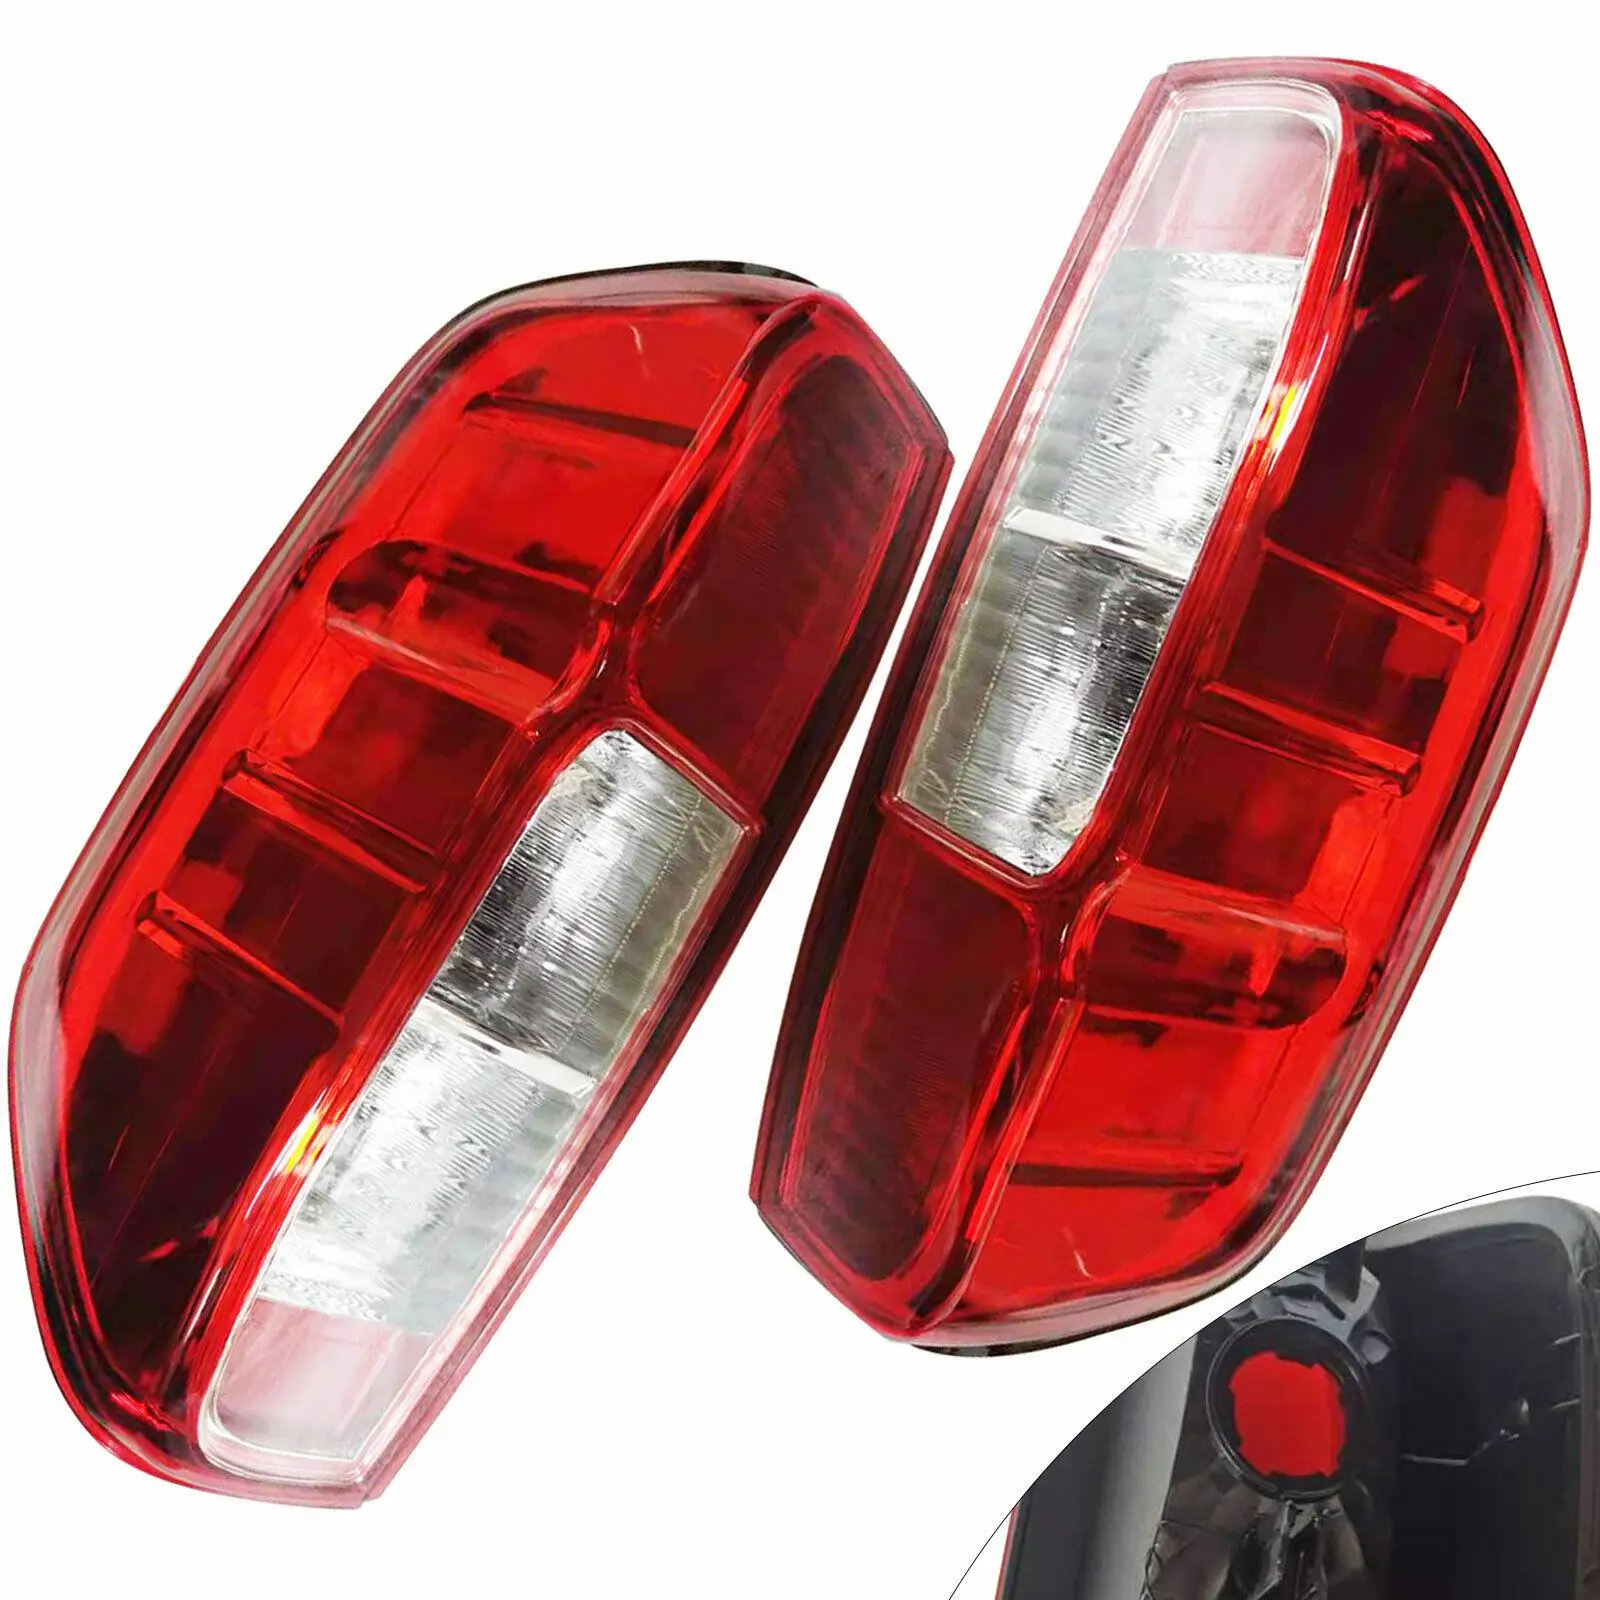 Pair Left & Right Rear Brake Lamps Tail Lights Taillamps for Nissan Frontier 2005-2015 Red Lens 2pcs rear brake lights mini pc professional 12v 85v red blue rear brake lights brake tail lights for atv